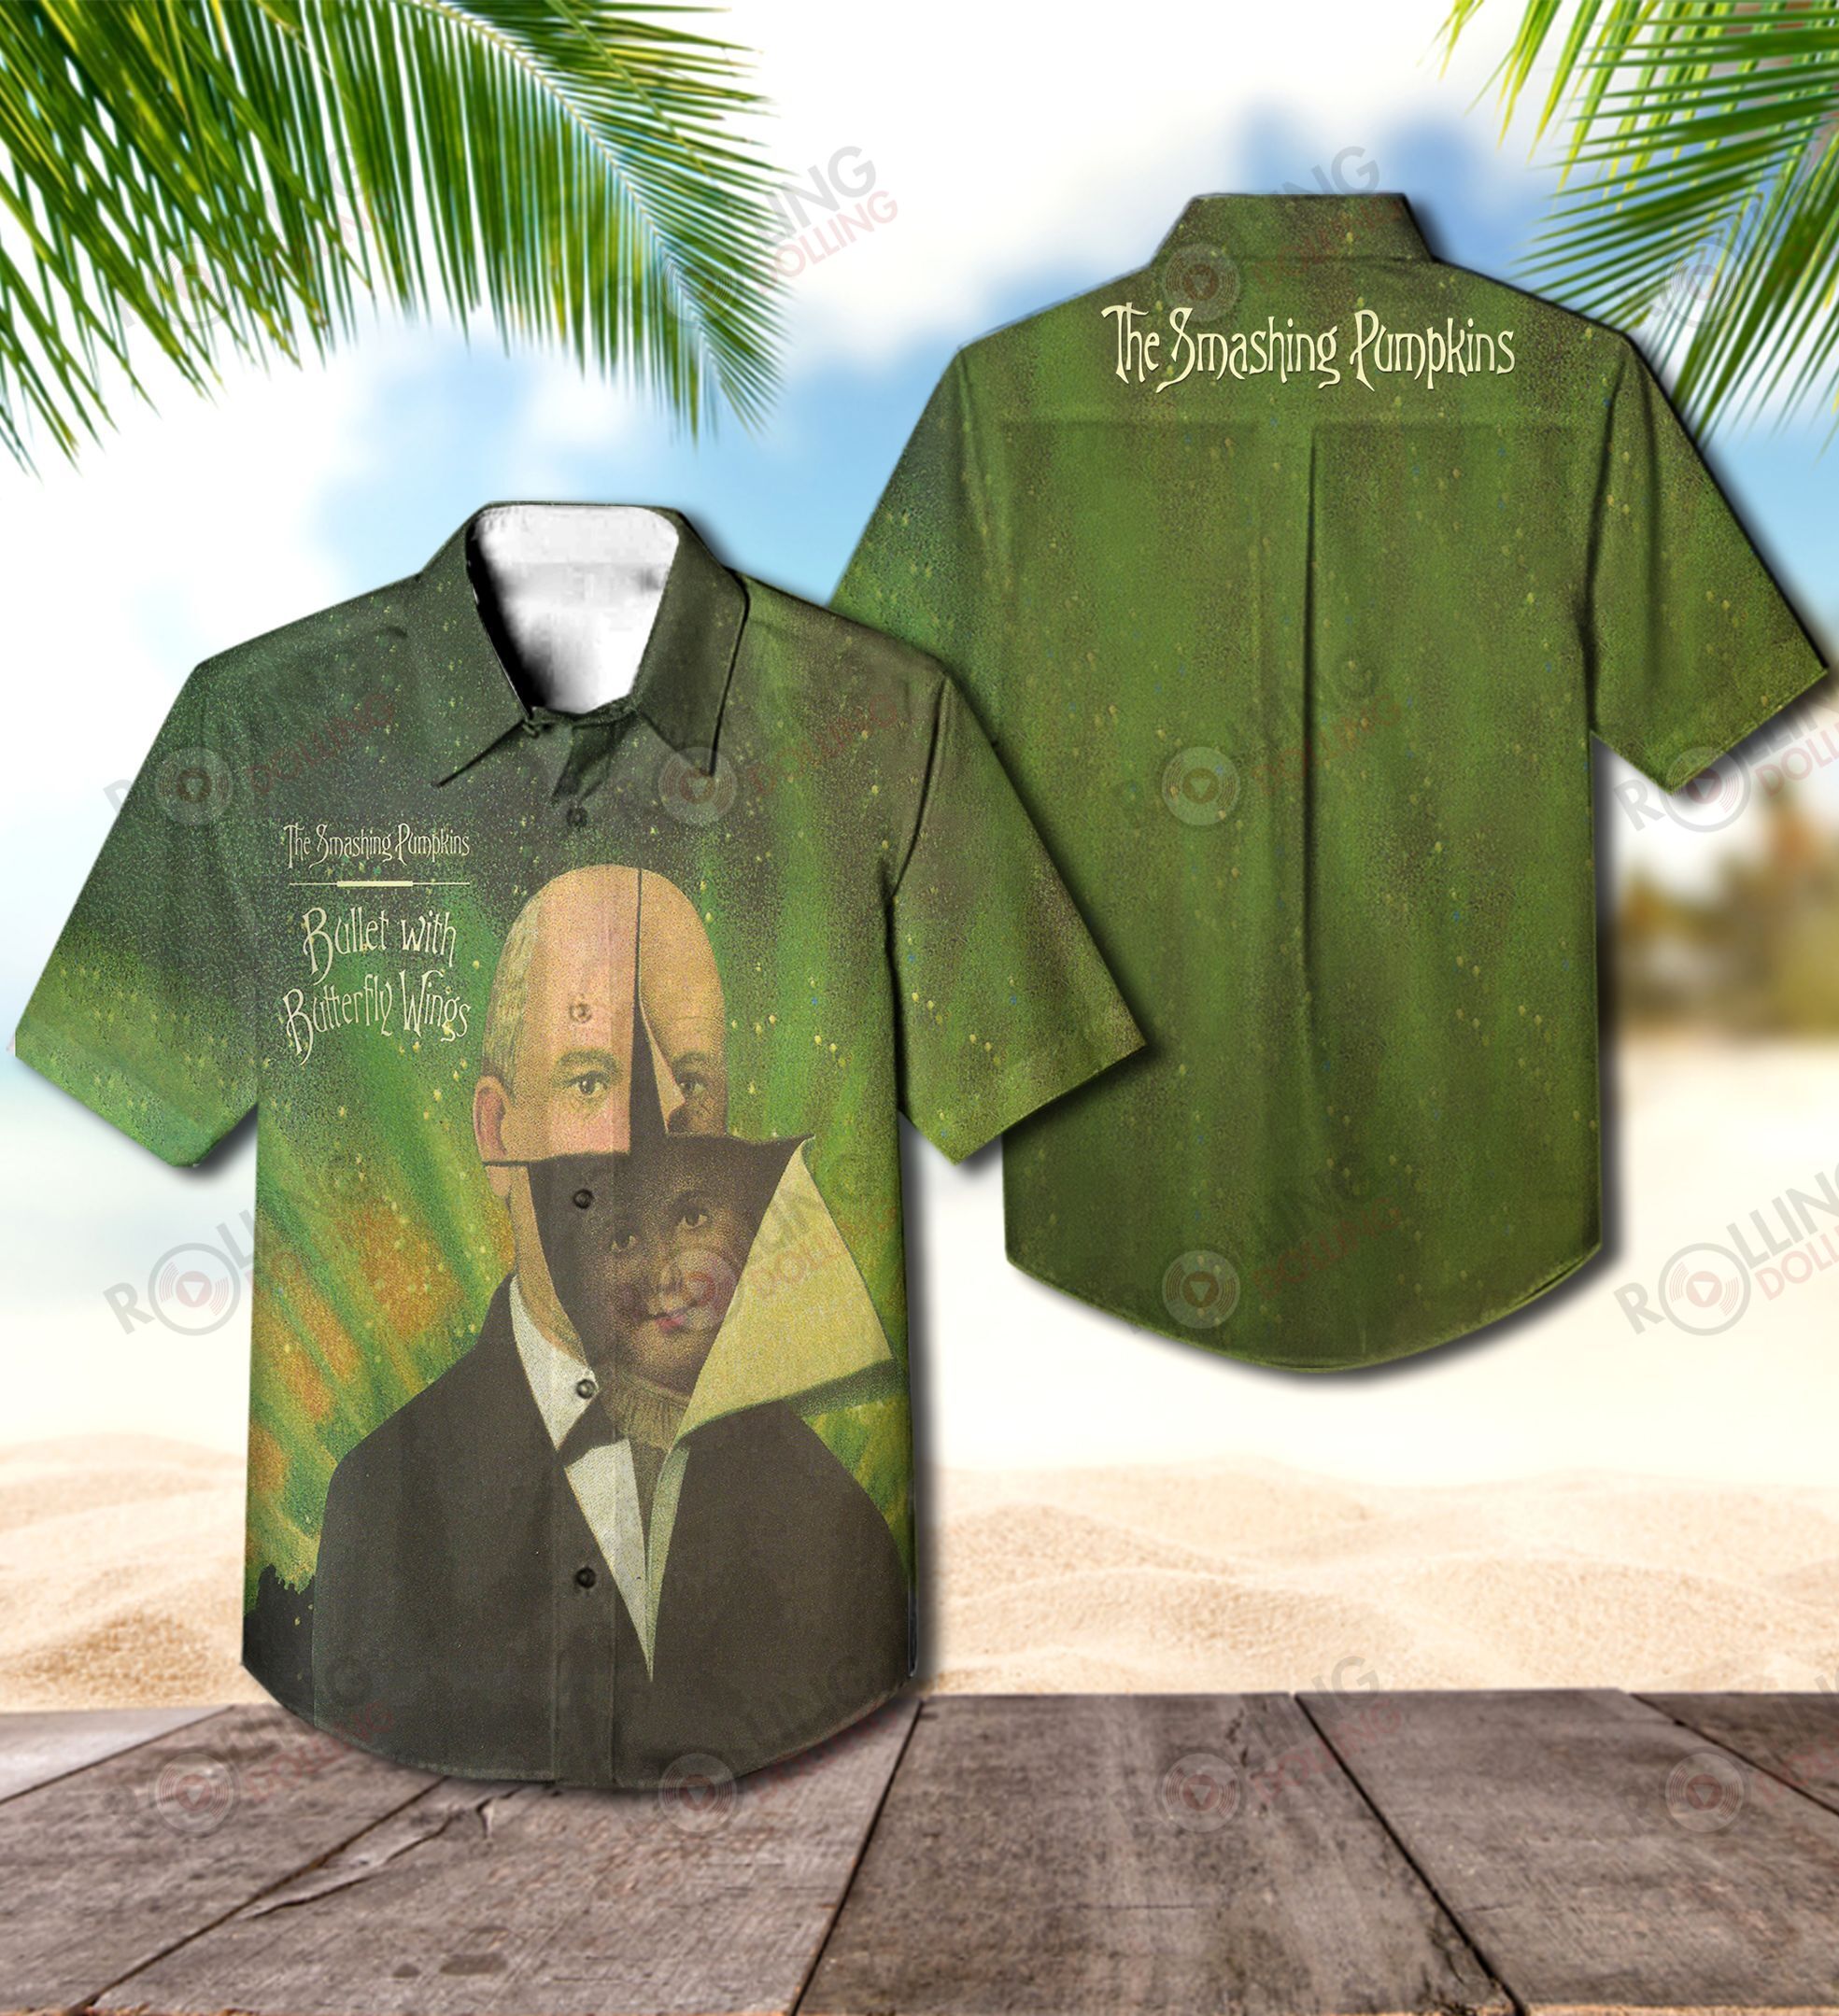 This would make a great gift for any fan who loves Hawaiian Shirt as well as Rock band 115